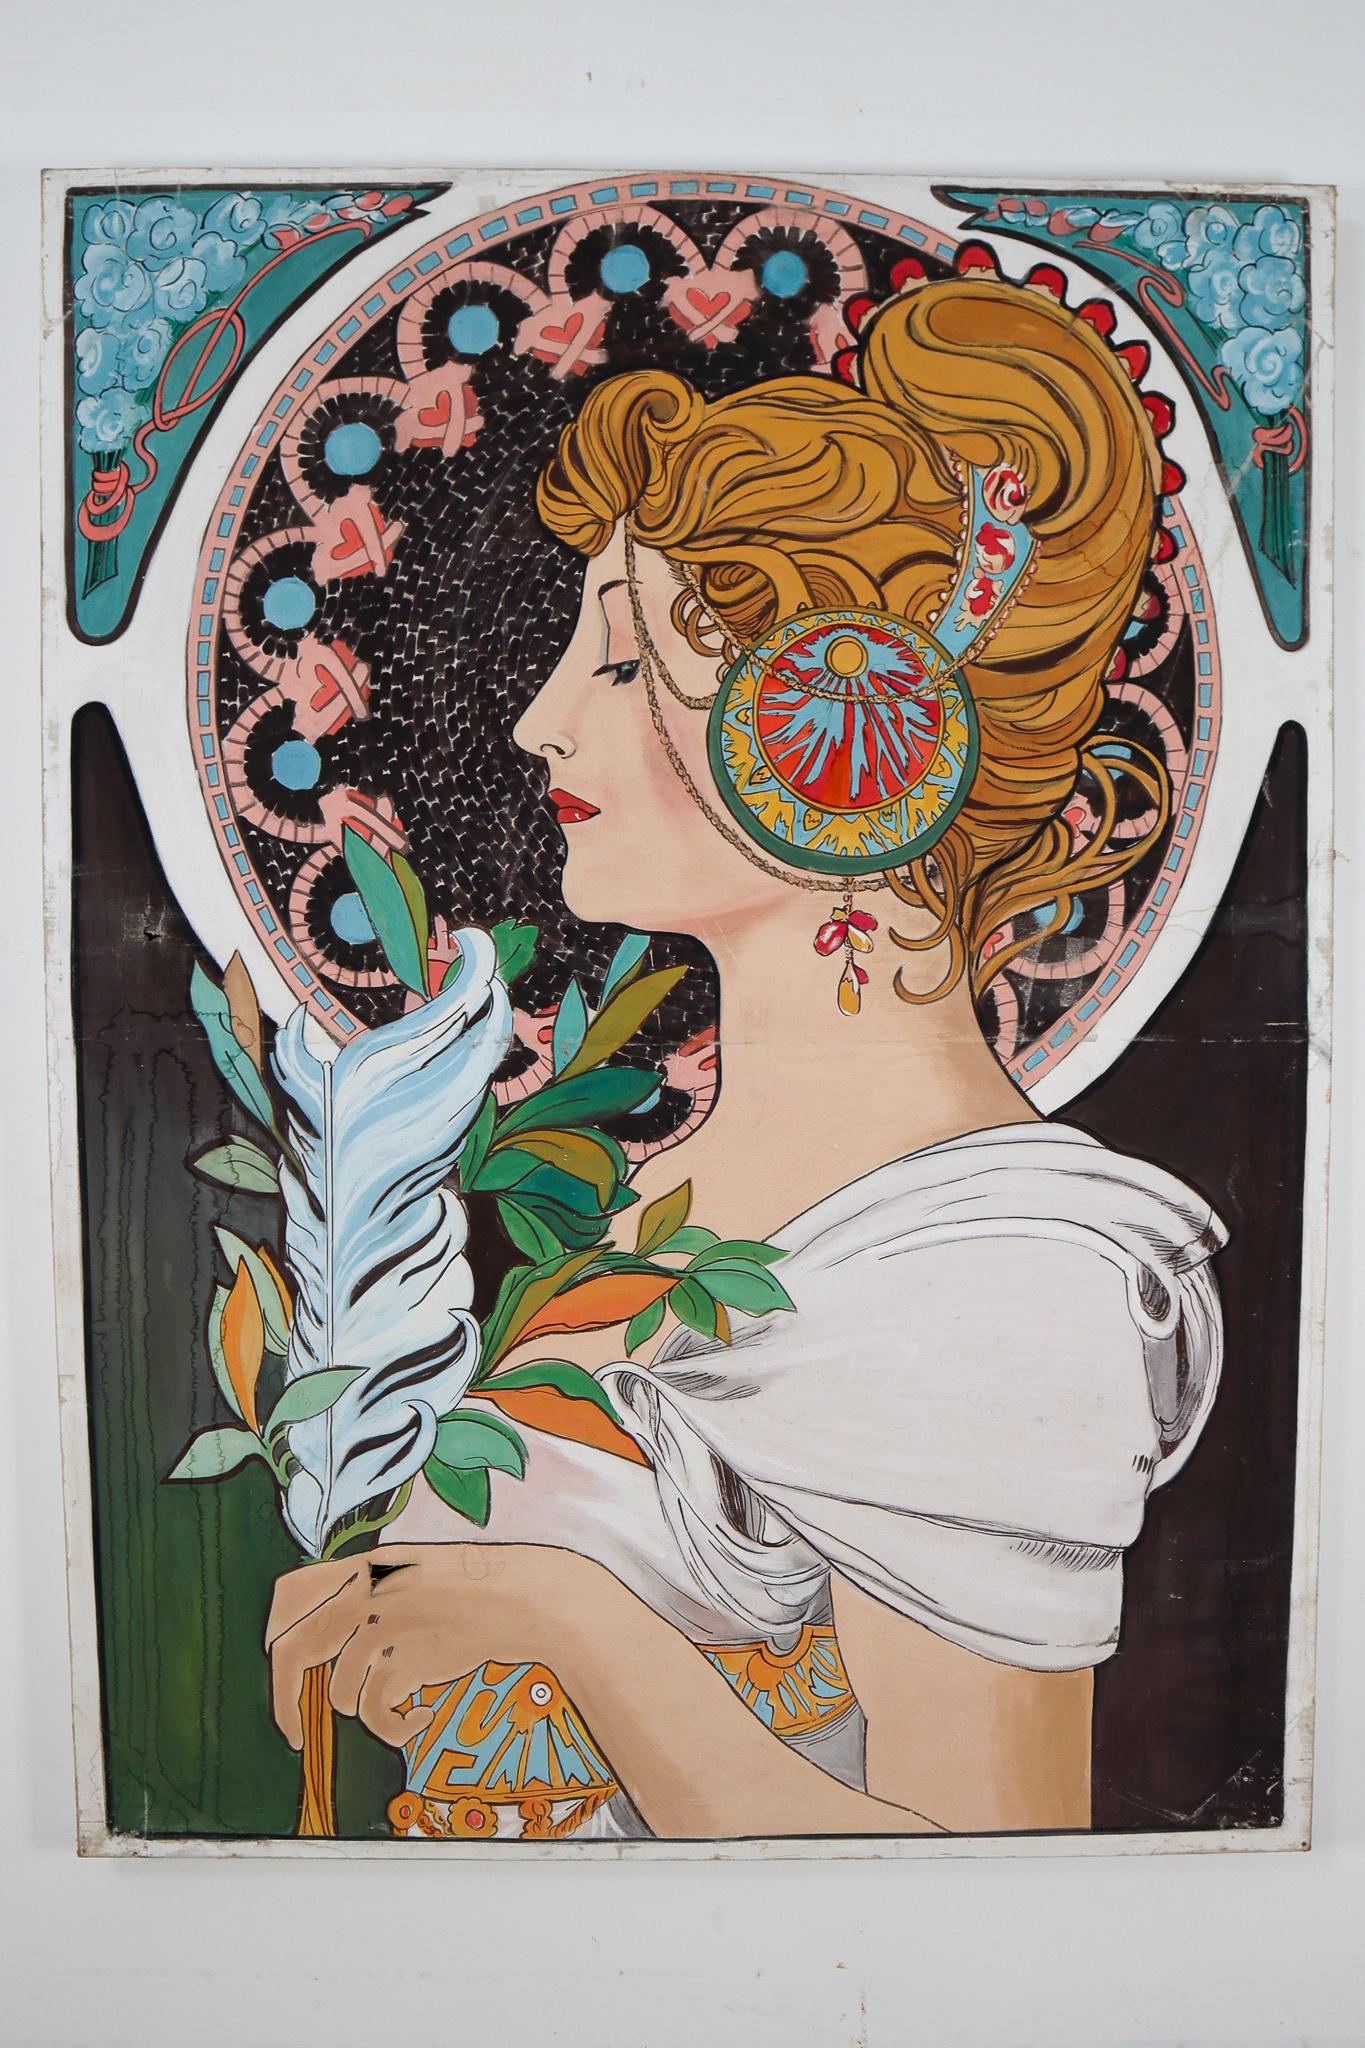 This large painting is in the style of Alphonse Mucha, from a famous theather in Prague. It's made of linnen with a wooden frame in a colorful paint.
His style is characterized by the elegant lines, fresh pastel colors and lush motifs. His works are